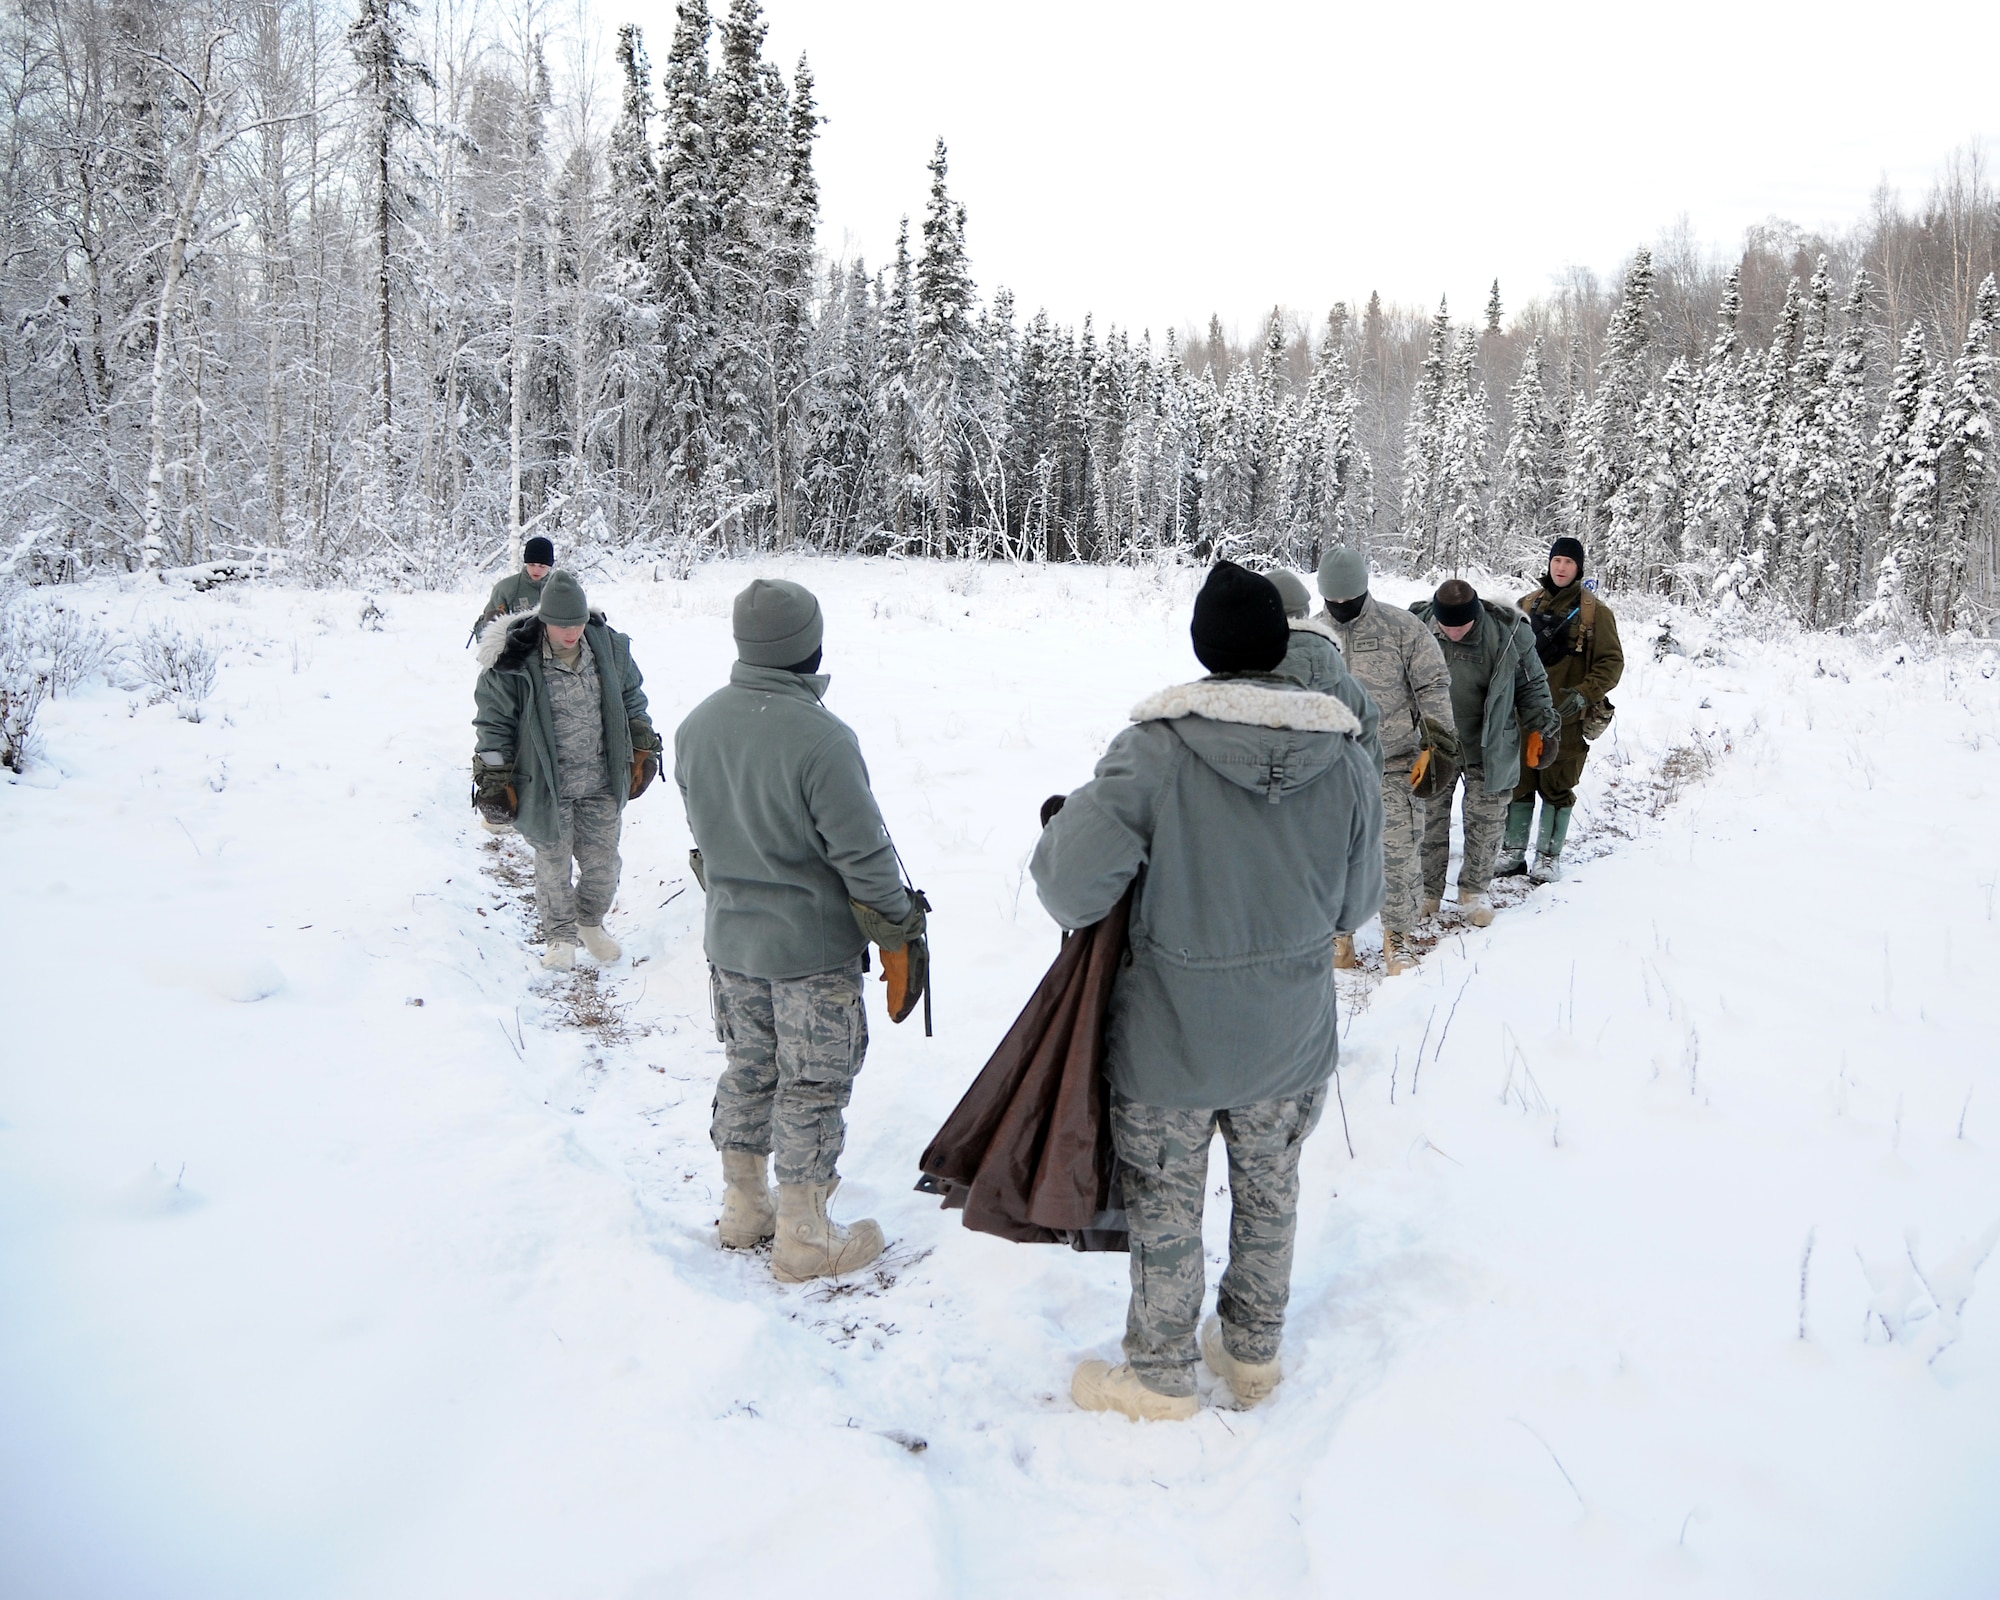 An Arctic Survival School class performs proper rescue recovery signal creation practices Nov. 9, 2011, Eielson Air Force Base, Alaska. (U.S. Air Force photo by Senior Airman Willard Grande II/Released)